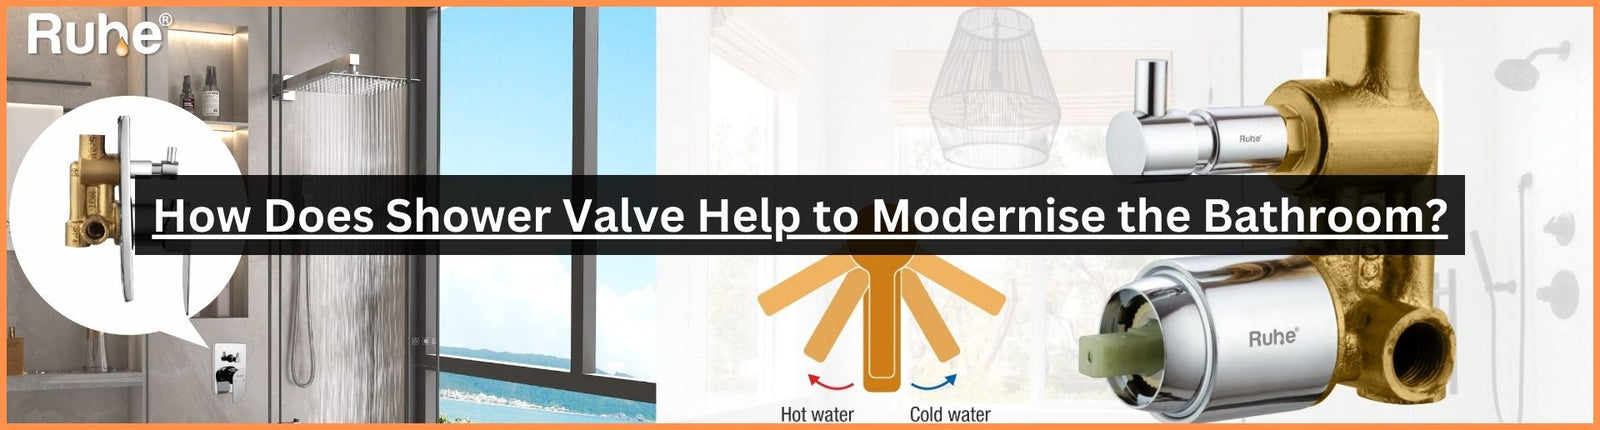 How Does Shower Valve Help to Modernise the Bathroom